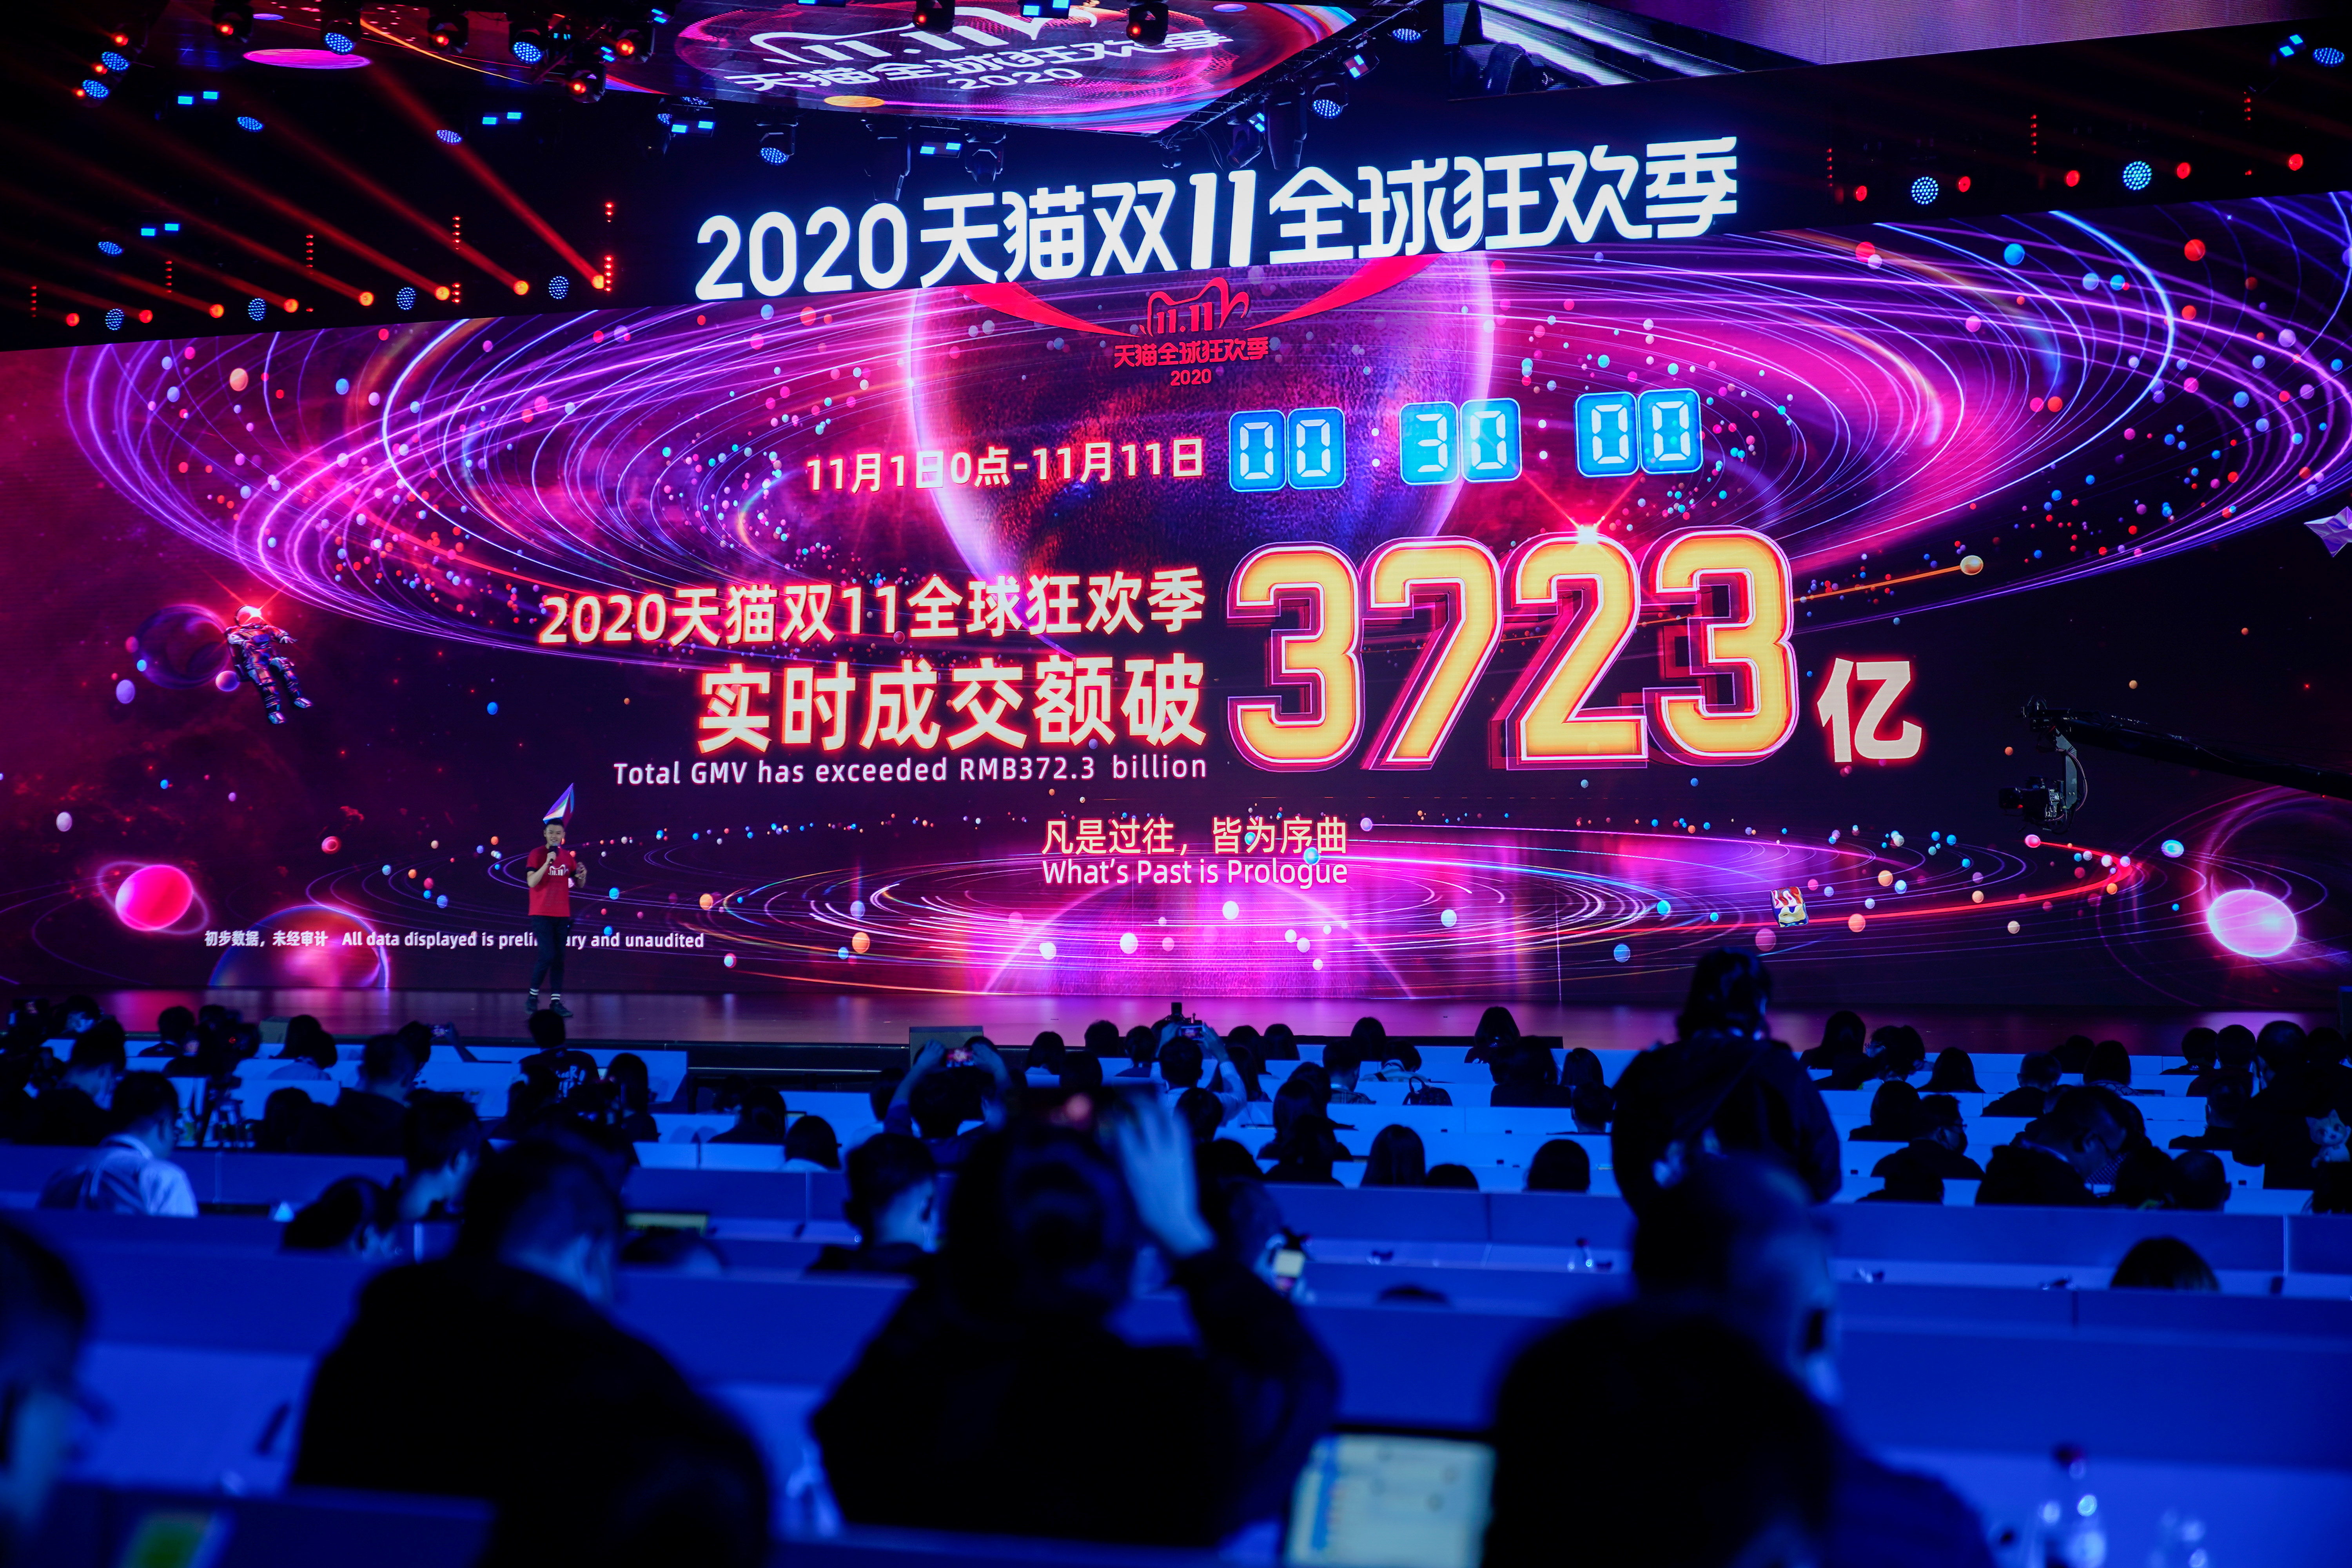 China e-shopping event rings in 580,000 sales per second